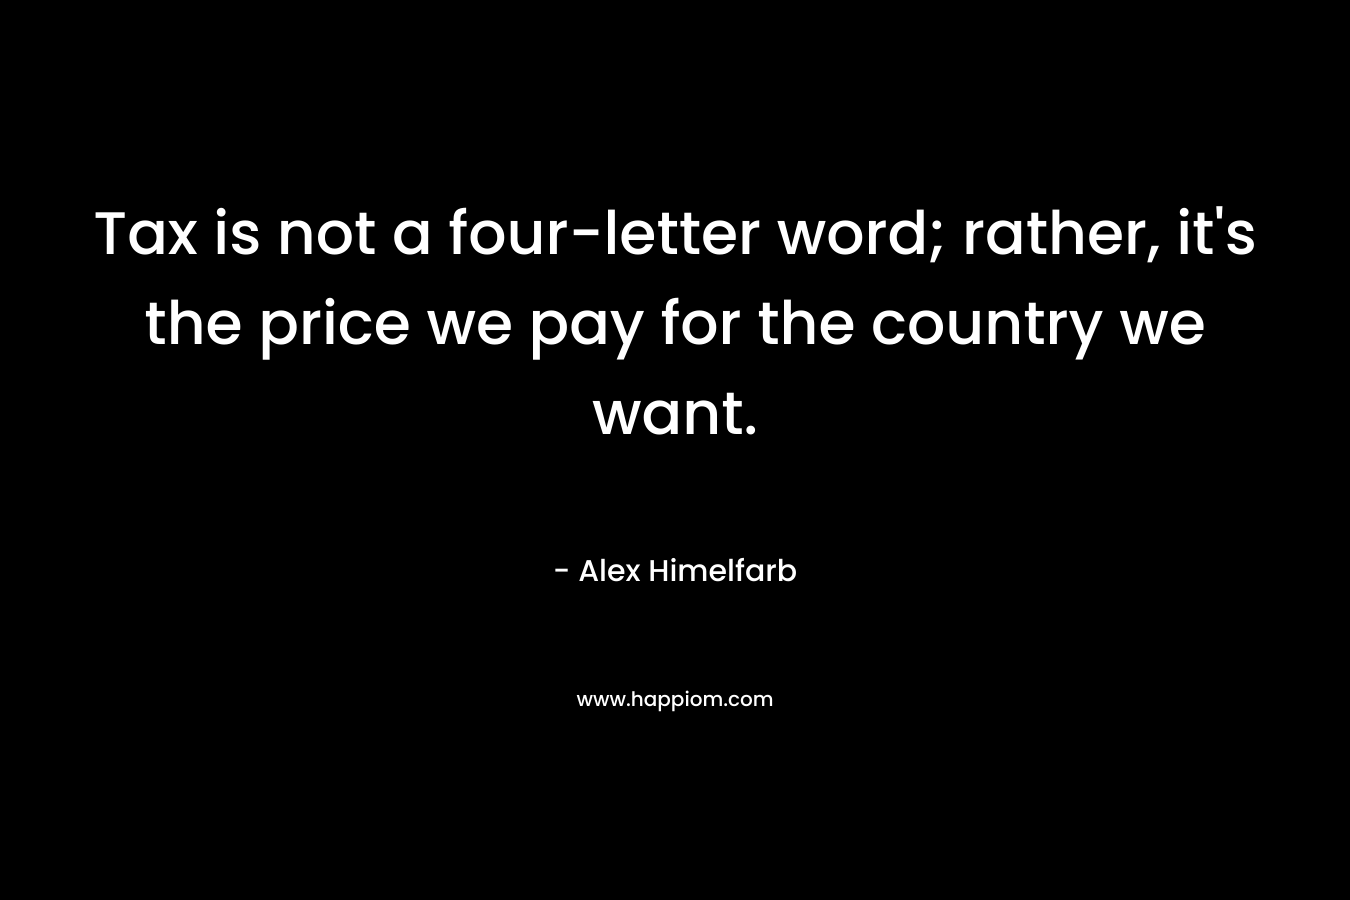 Tax is not a four-letter word; rather, it’s the price we pay for the country we want. – Alex Himelfarb